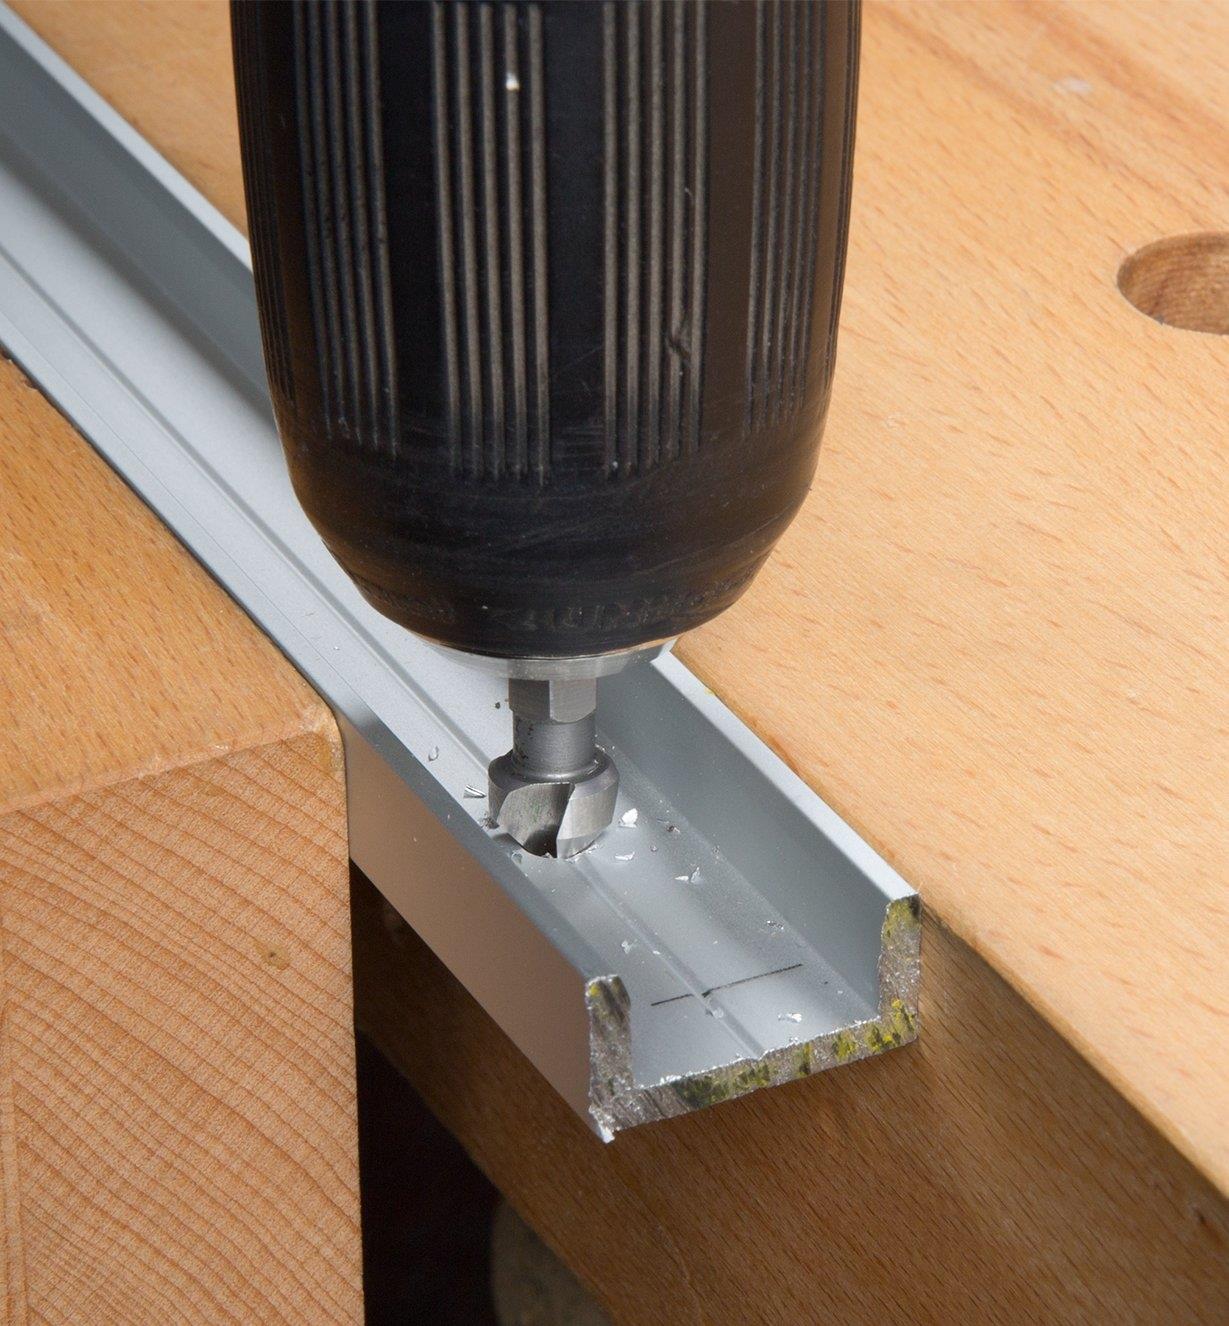 Drilling into a miter slot extrusion